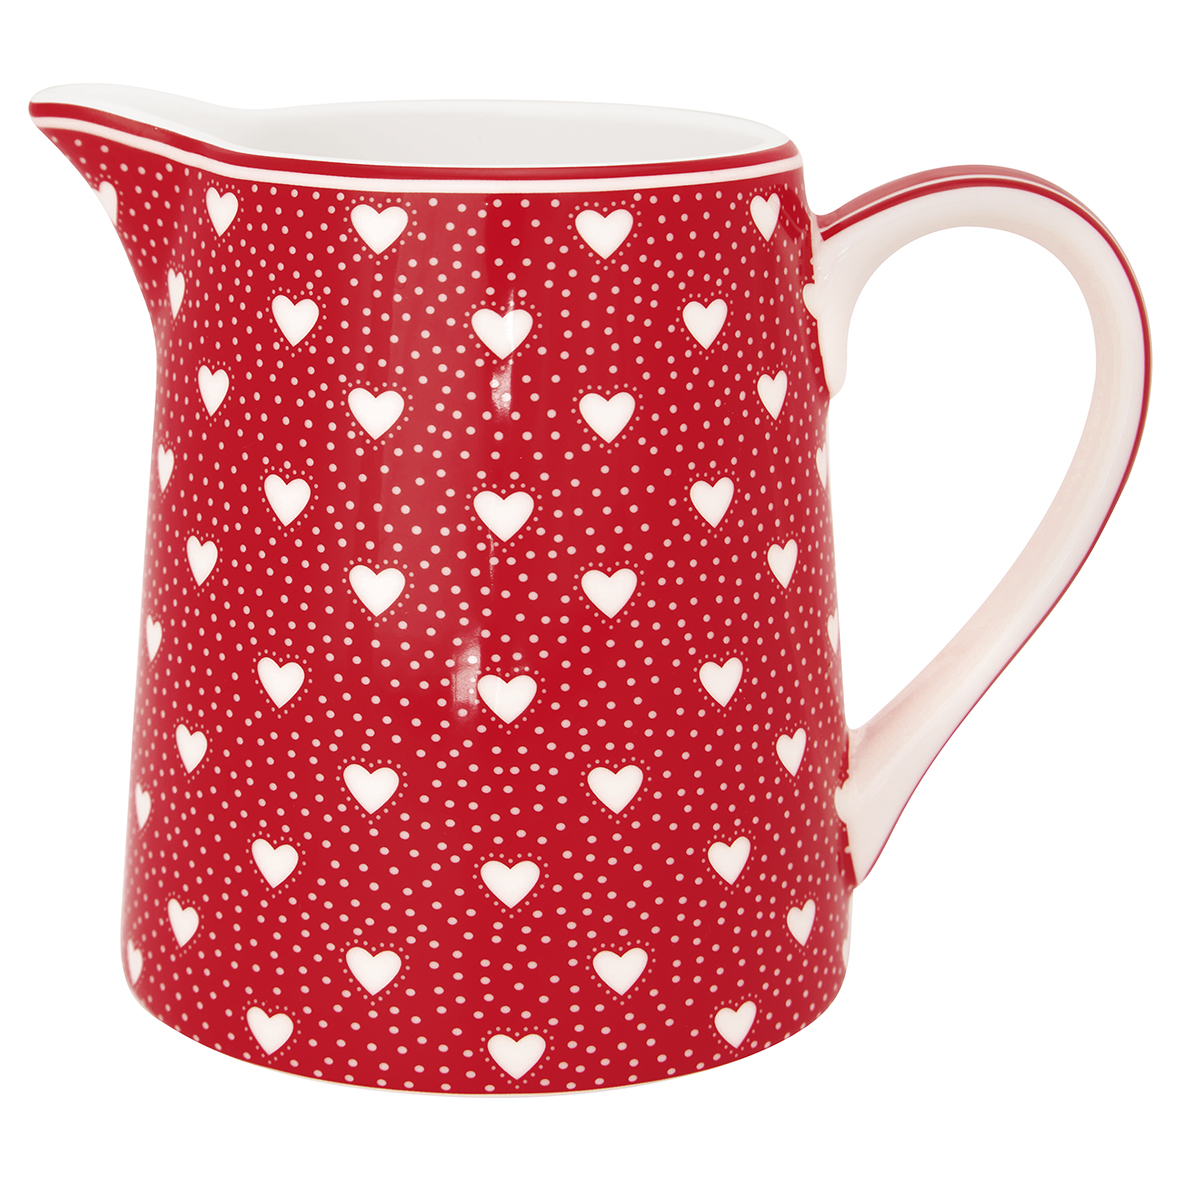 Greengate Milchkrug Penny red 0,5l